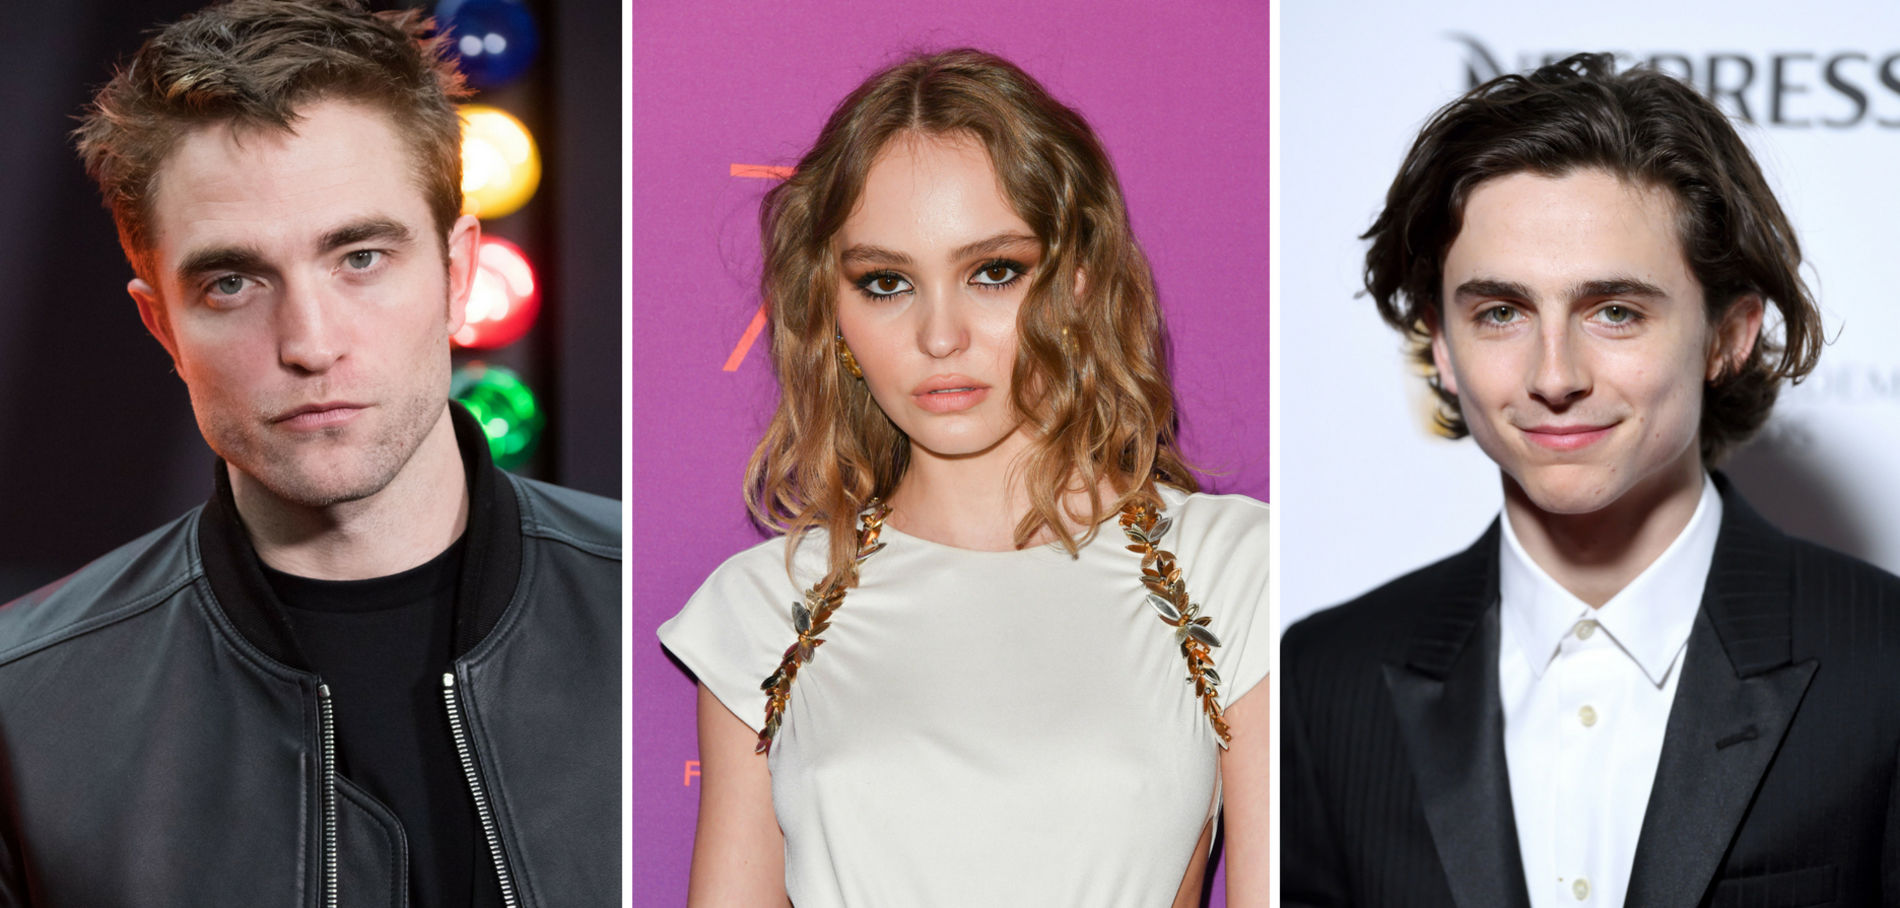 Robert Pattinson And Lily-Rose Depp Joins Cast Of Netflix's 'The King' | Film News ...1900 x 908